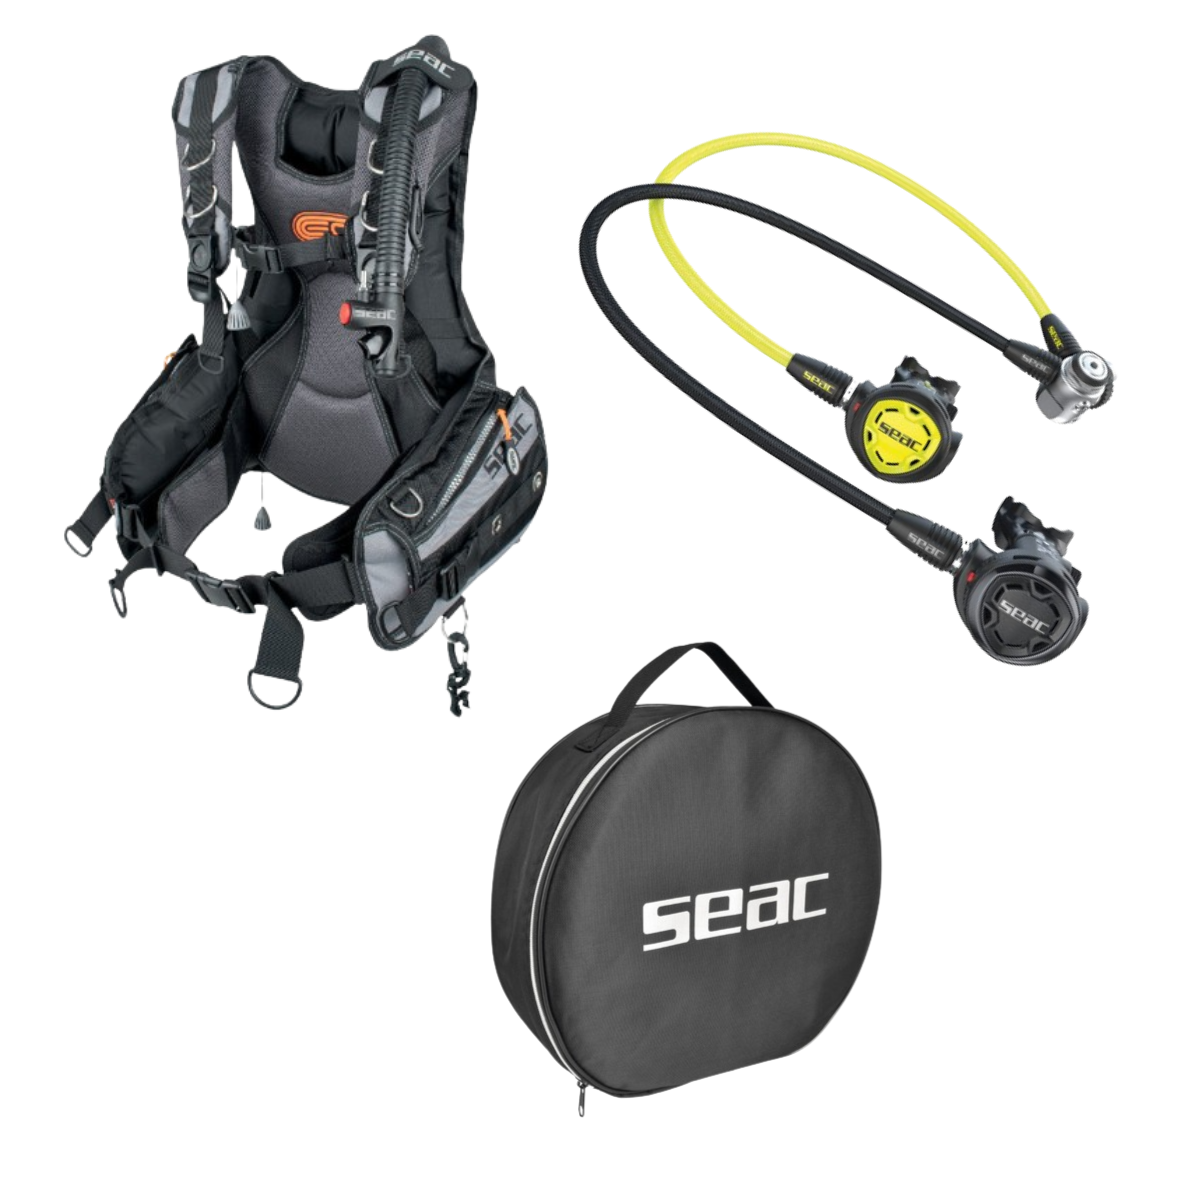 EQ PRO Dive Master Seac IT 300 Regulator Set with EQ PRO BCD Value Dive Package